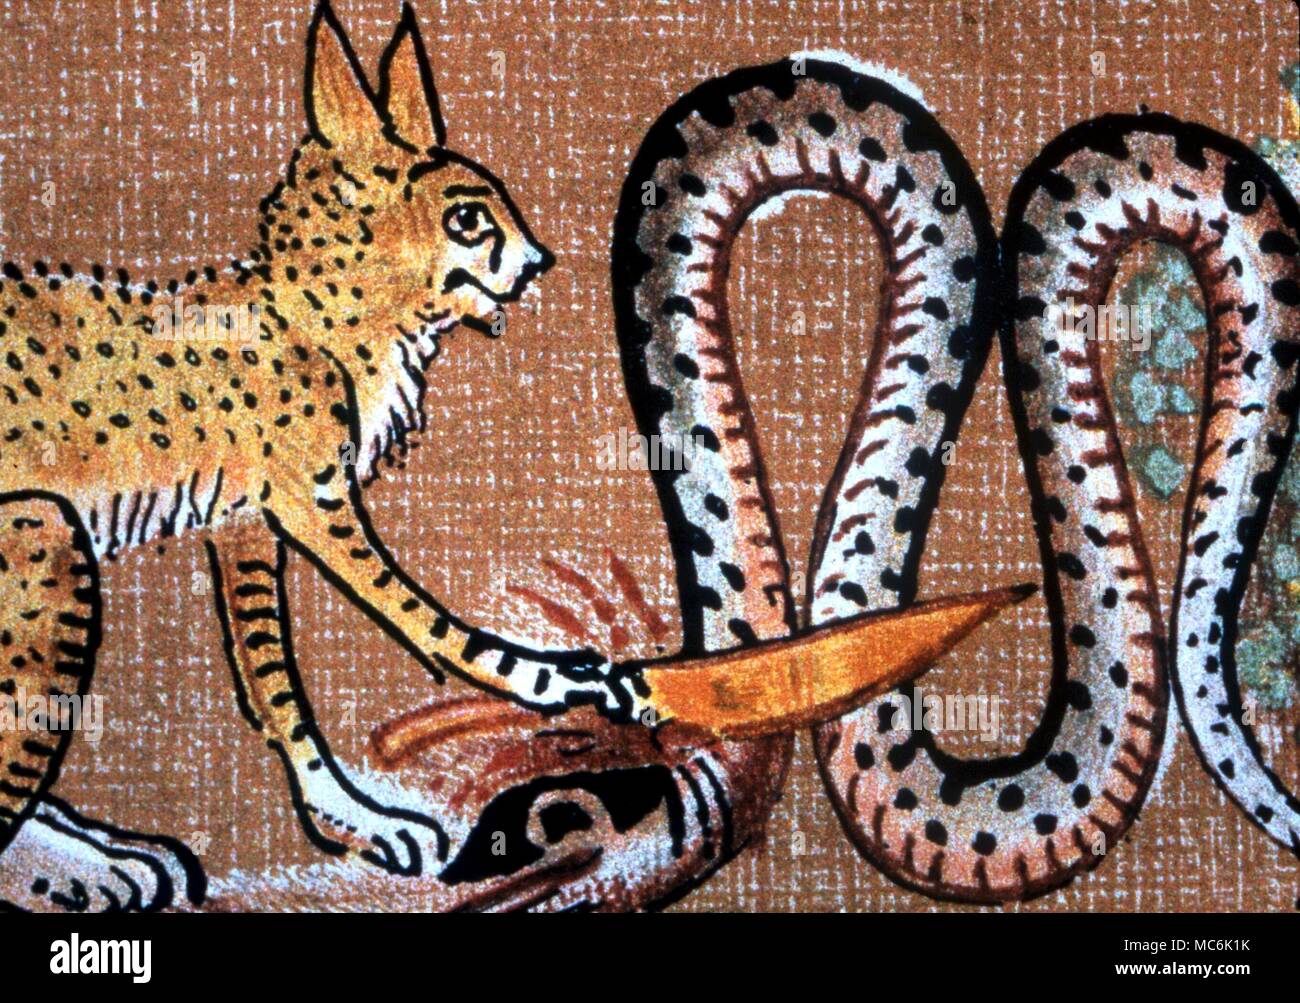 DEMONS - The Egyptian goddess Bast, in the form of a cat, killing the demon Apep. From the Hunefer papyrus, lithographic copy made for Wallis Budge's 'Book of the Dead' Stock Photo